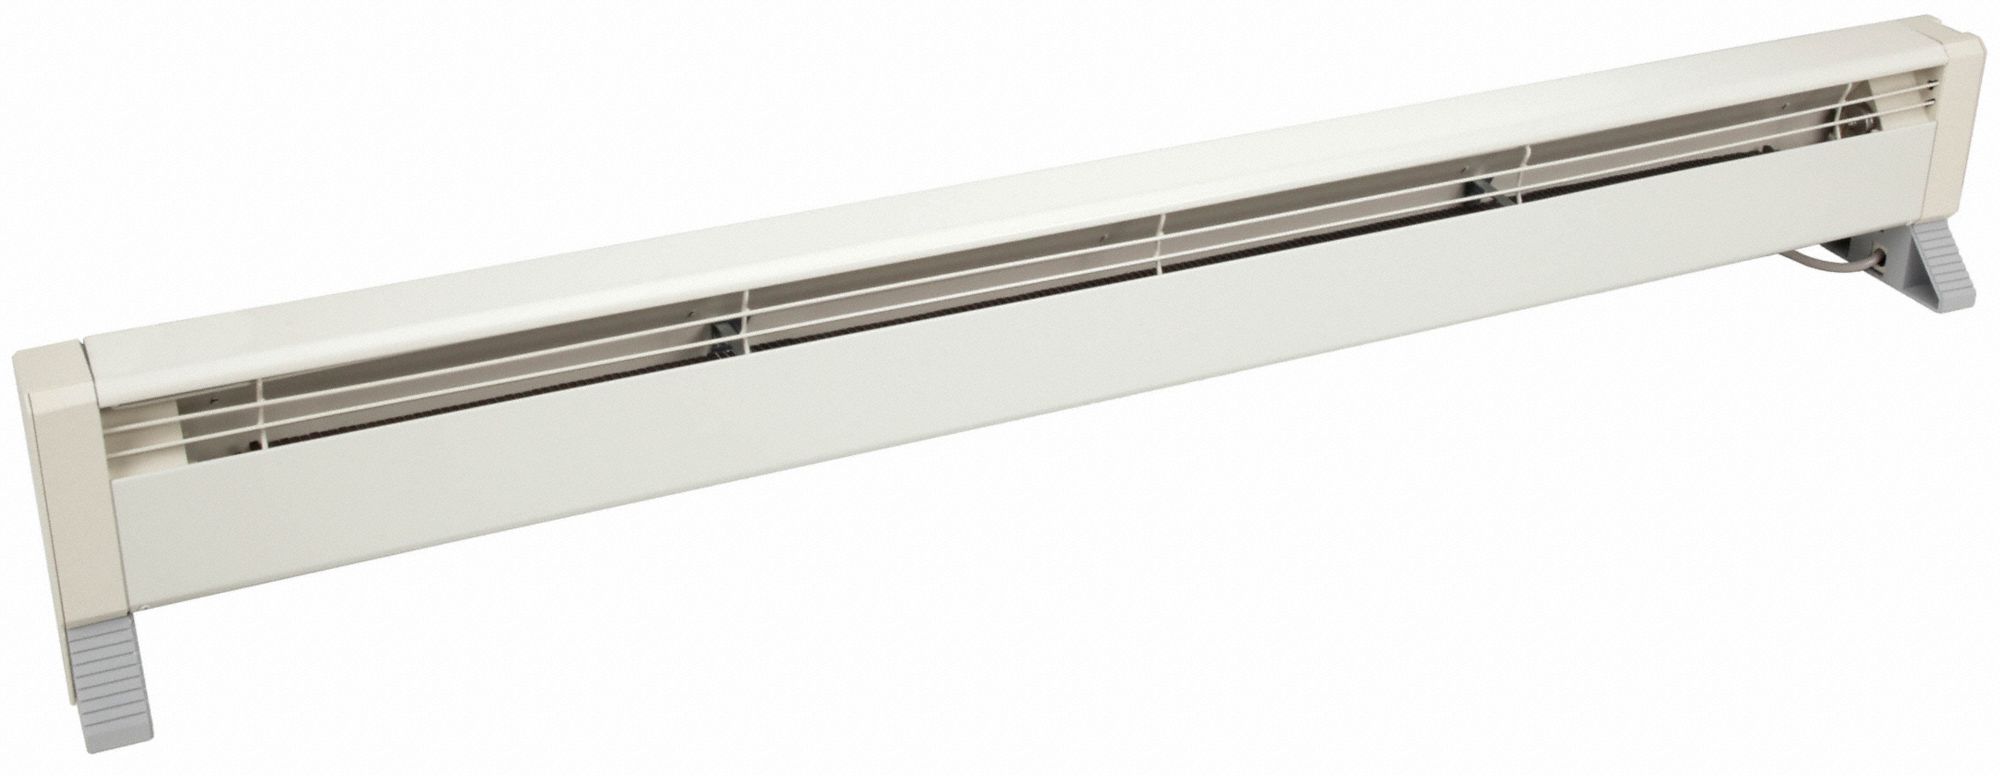 DAYTON Electric Baseboard Heater: 1500W, Overheat Protection/Tip-Over  Switch, White, 120V AC, 5-15P